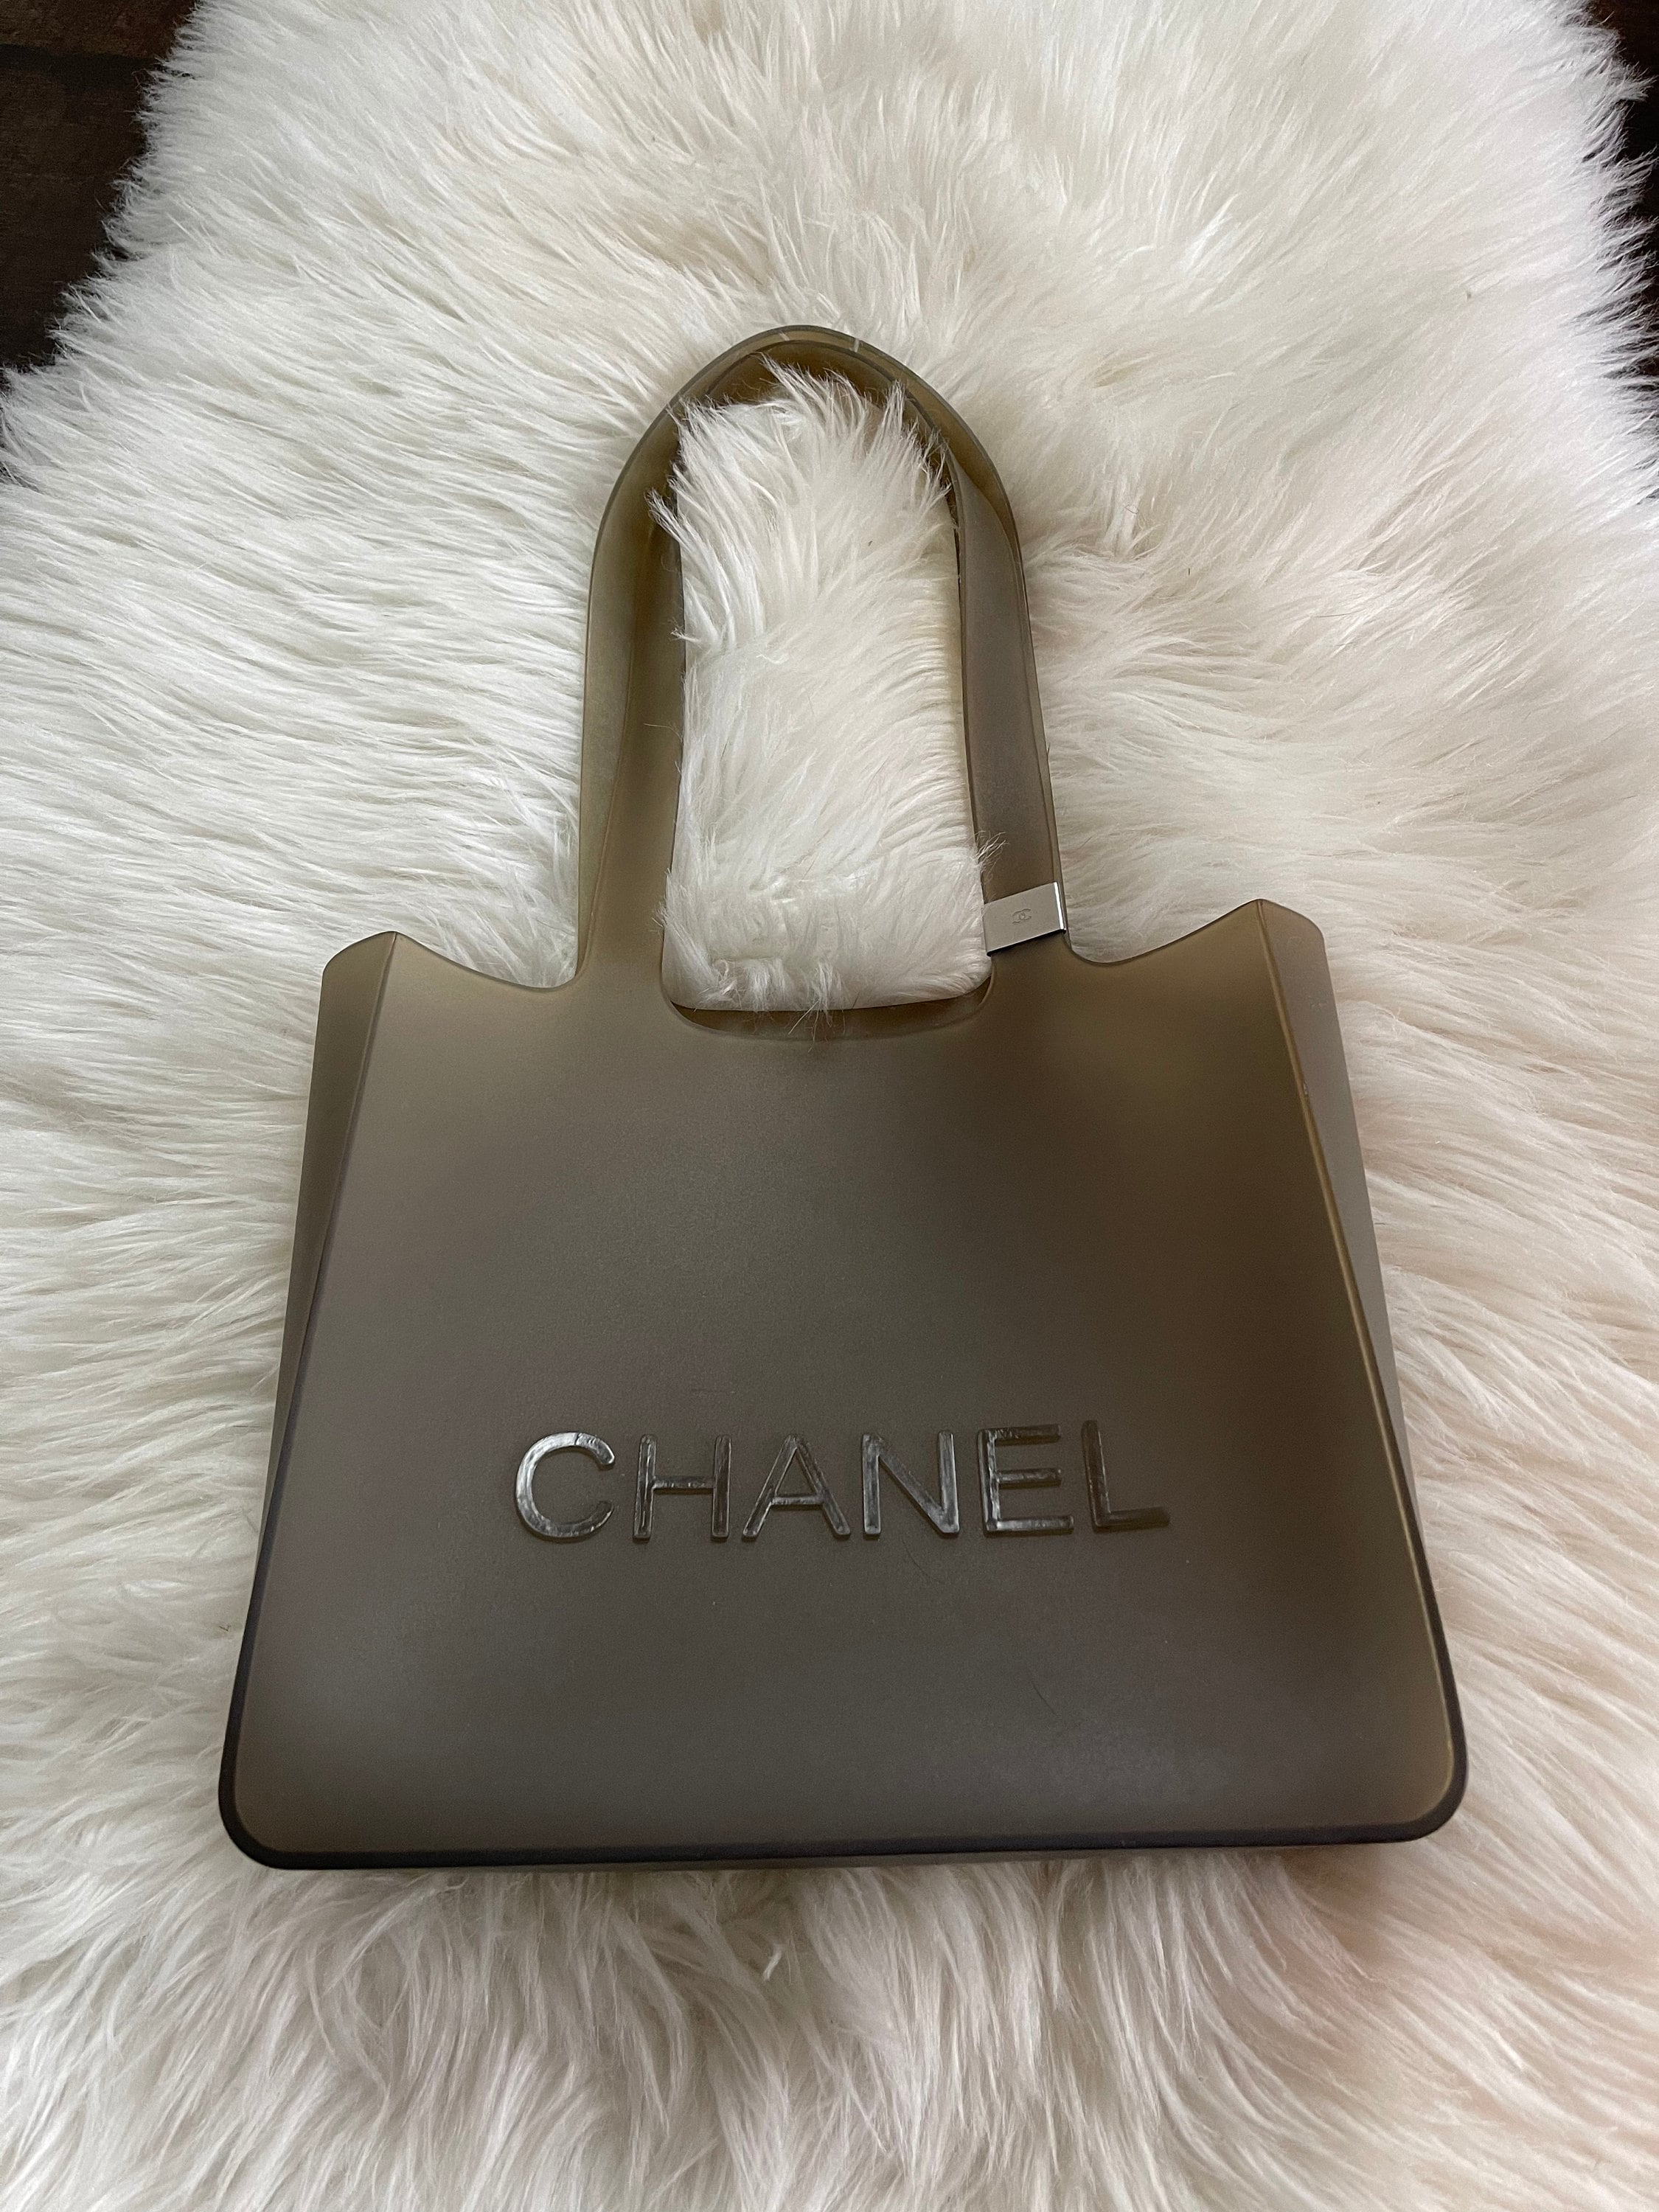 Vintage CHANEL Grey Gray Rubber Gummy Jelly Tote Bag Purse Gym 